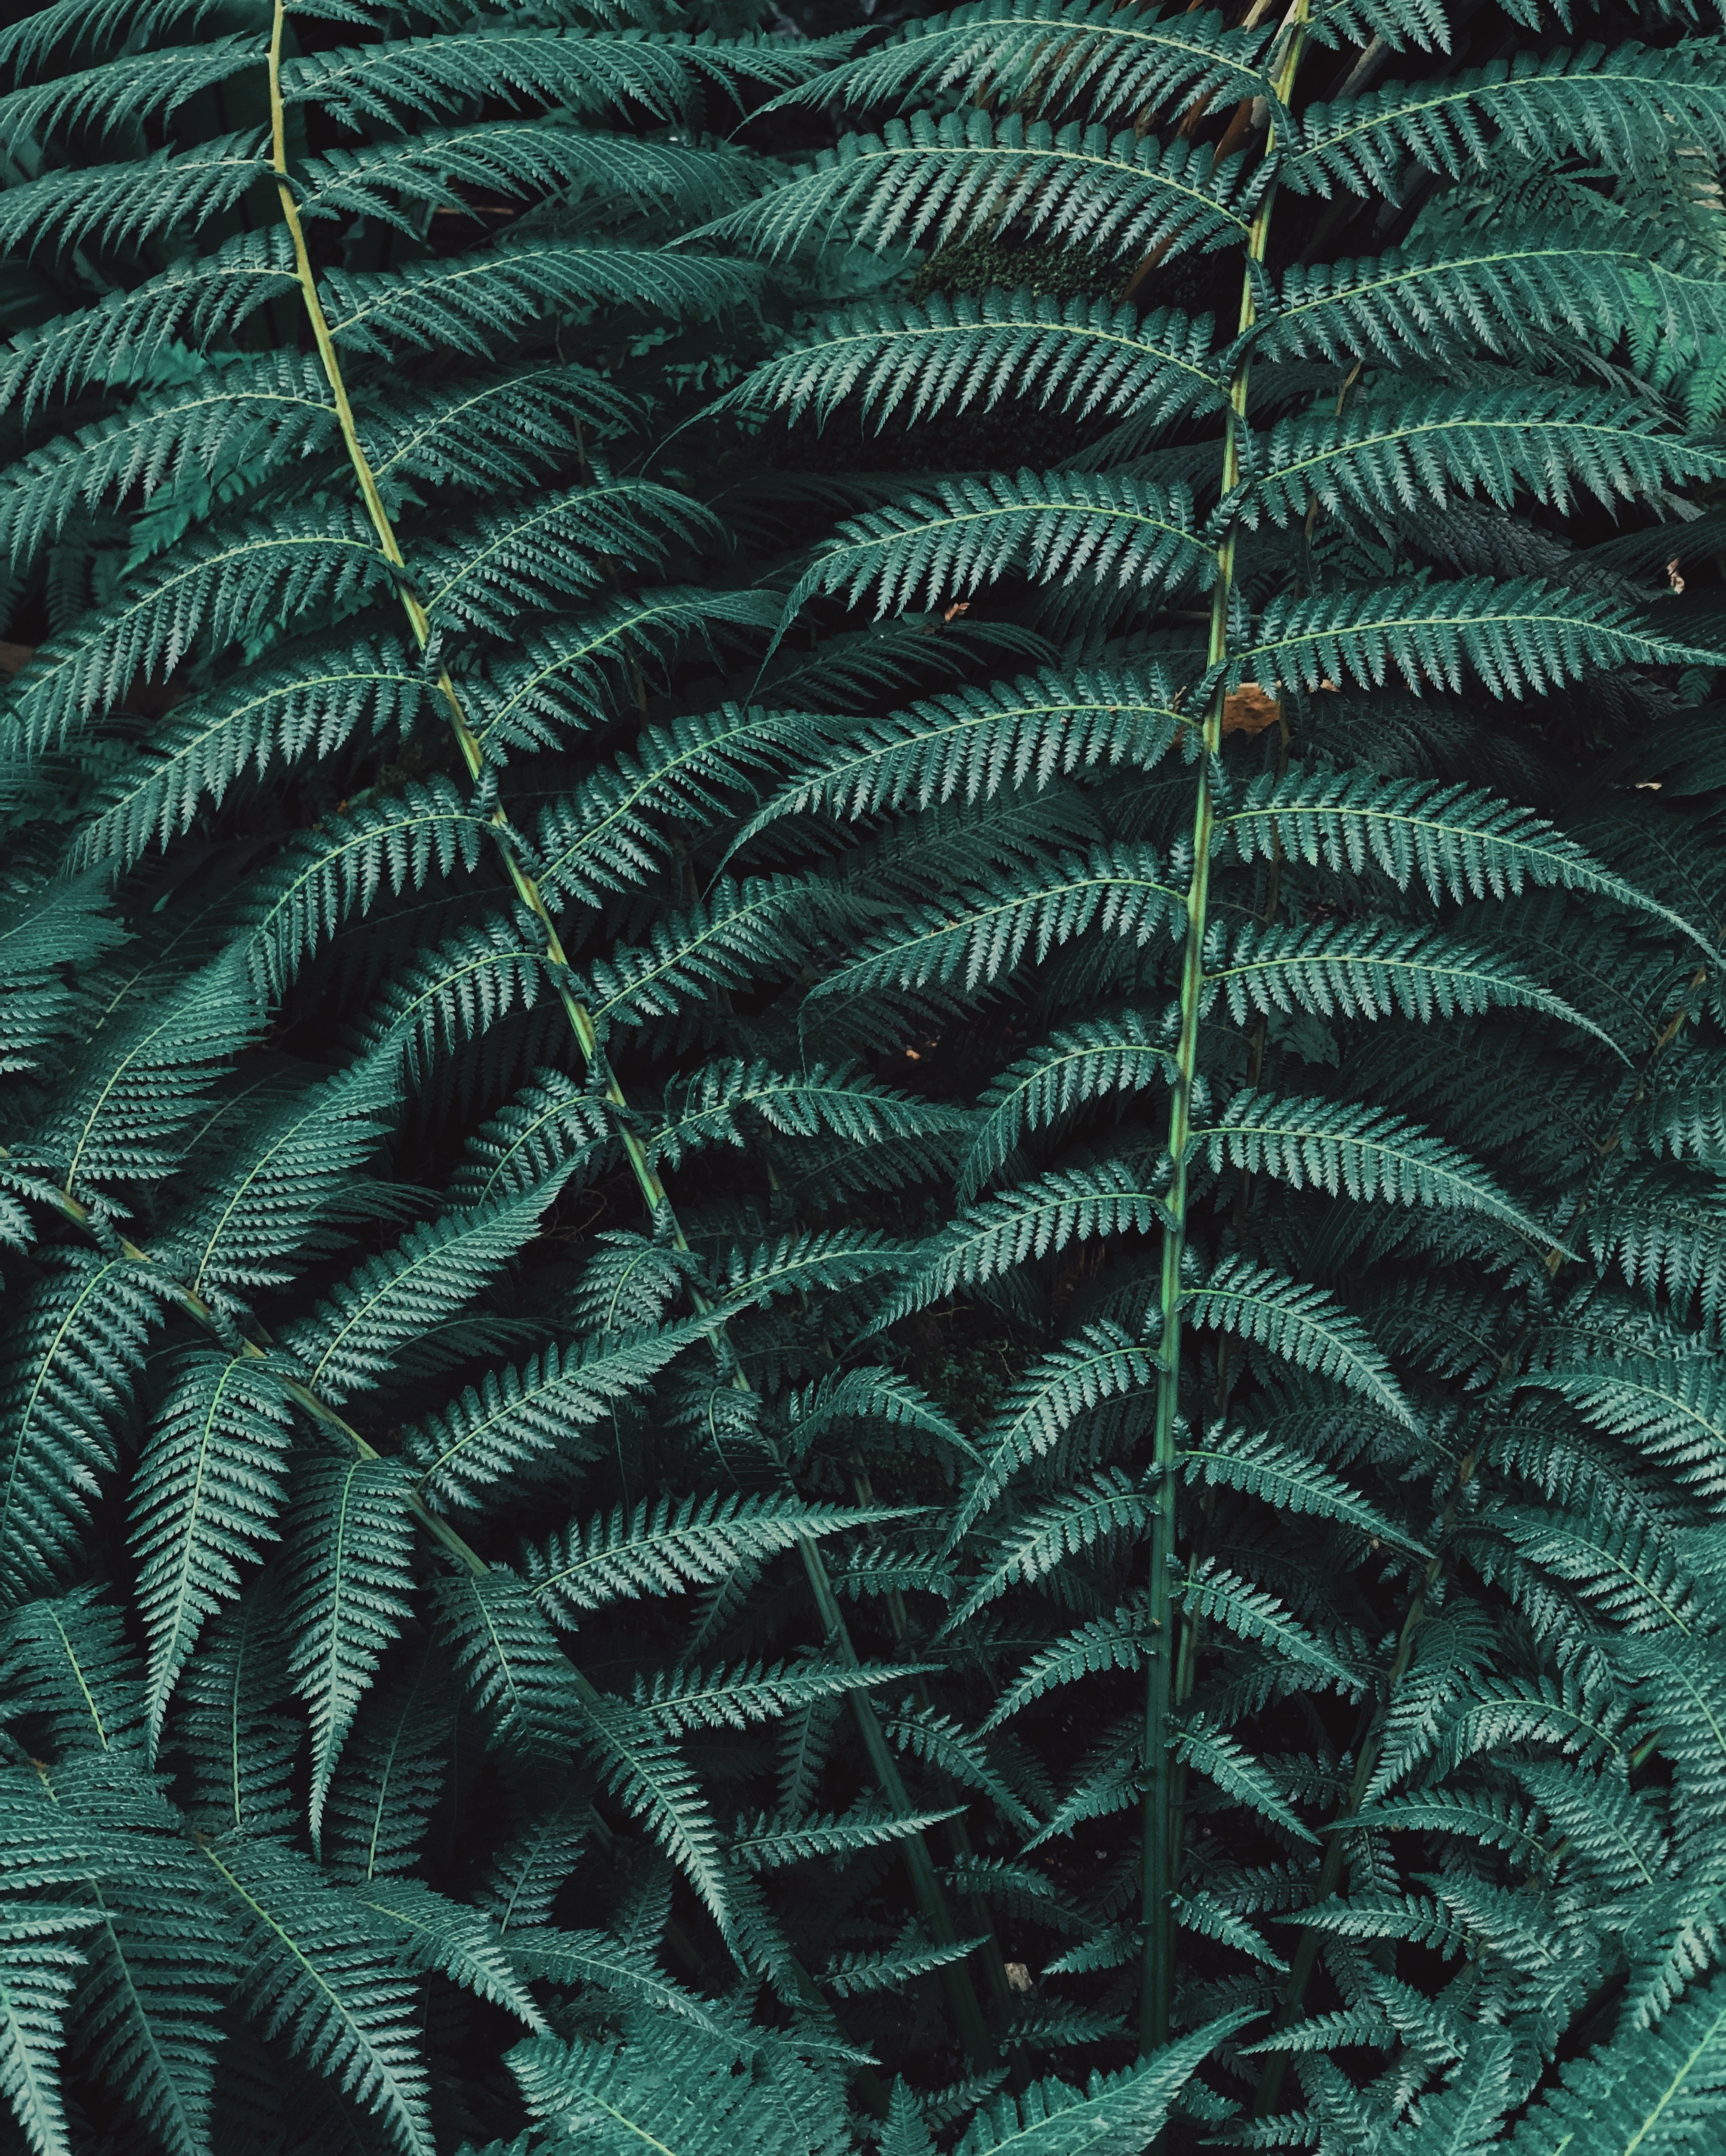 Wallpaper Full HD nature, leaves, green, plant, fern, carved